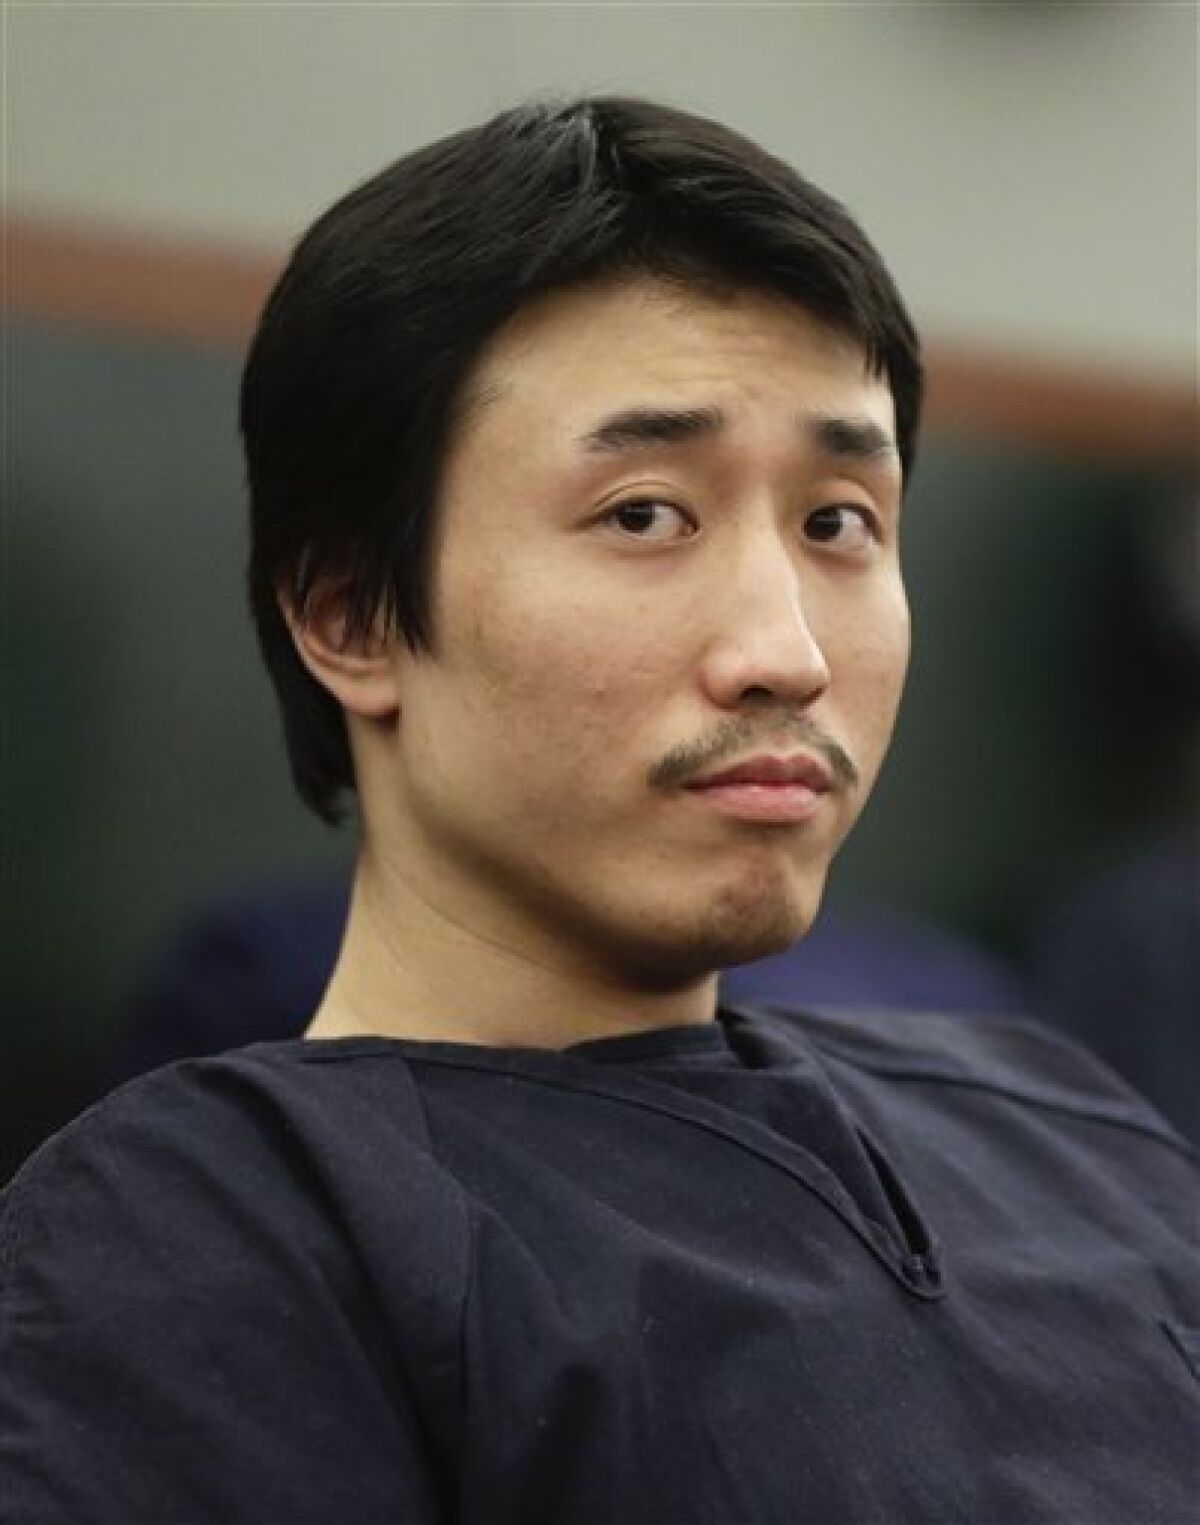 Xiao Ye Bai awaits his sentencing, Tuesday, March 5, 2013, in Las Vegas. The 26-year-old Chinese immigrant, convicted of being an enforcer for a Taiwan-based criminal gang, will spend the rest of his life in a Nevada prison for killing one person and wounding two others in a bloody knife attack in a Las Vegas karaoke bar in July 2009. (AP Photo/Julie Jacobson)